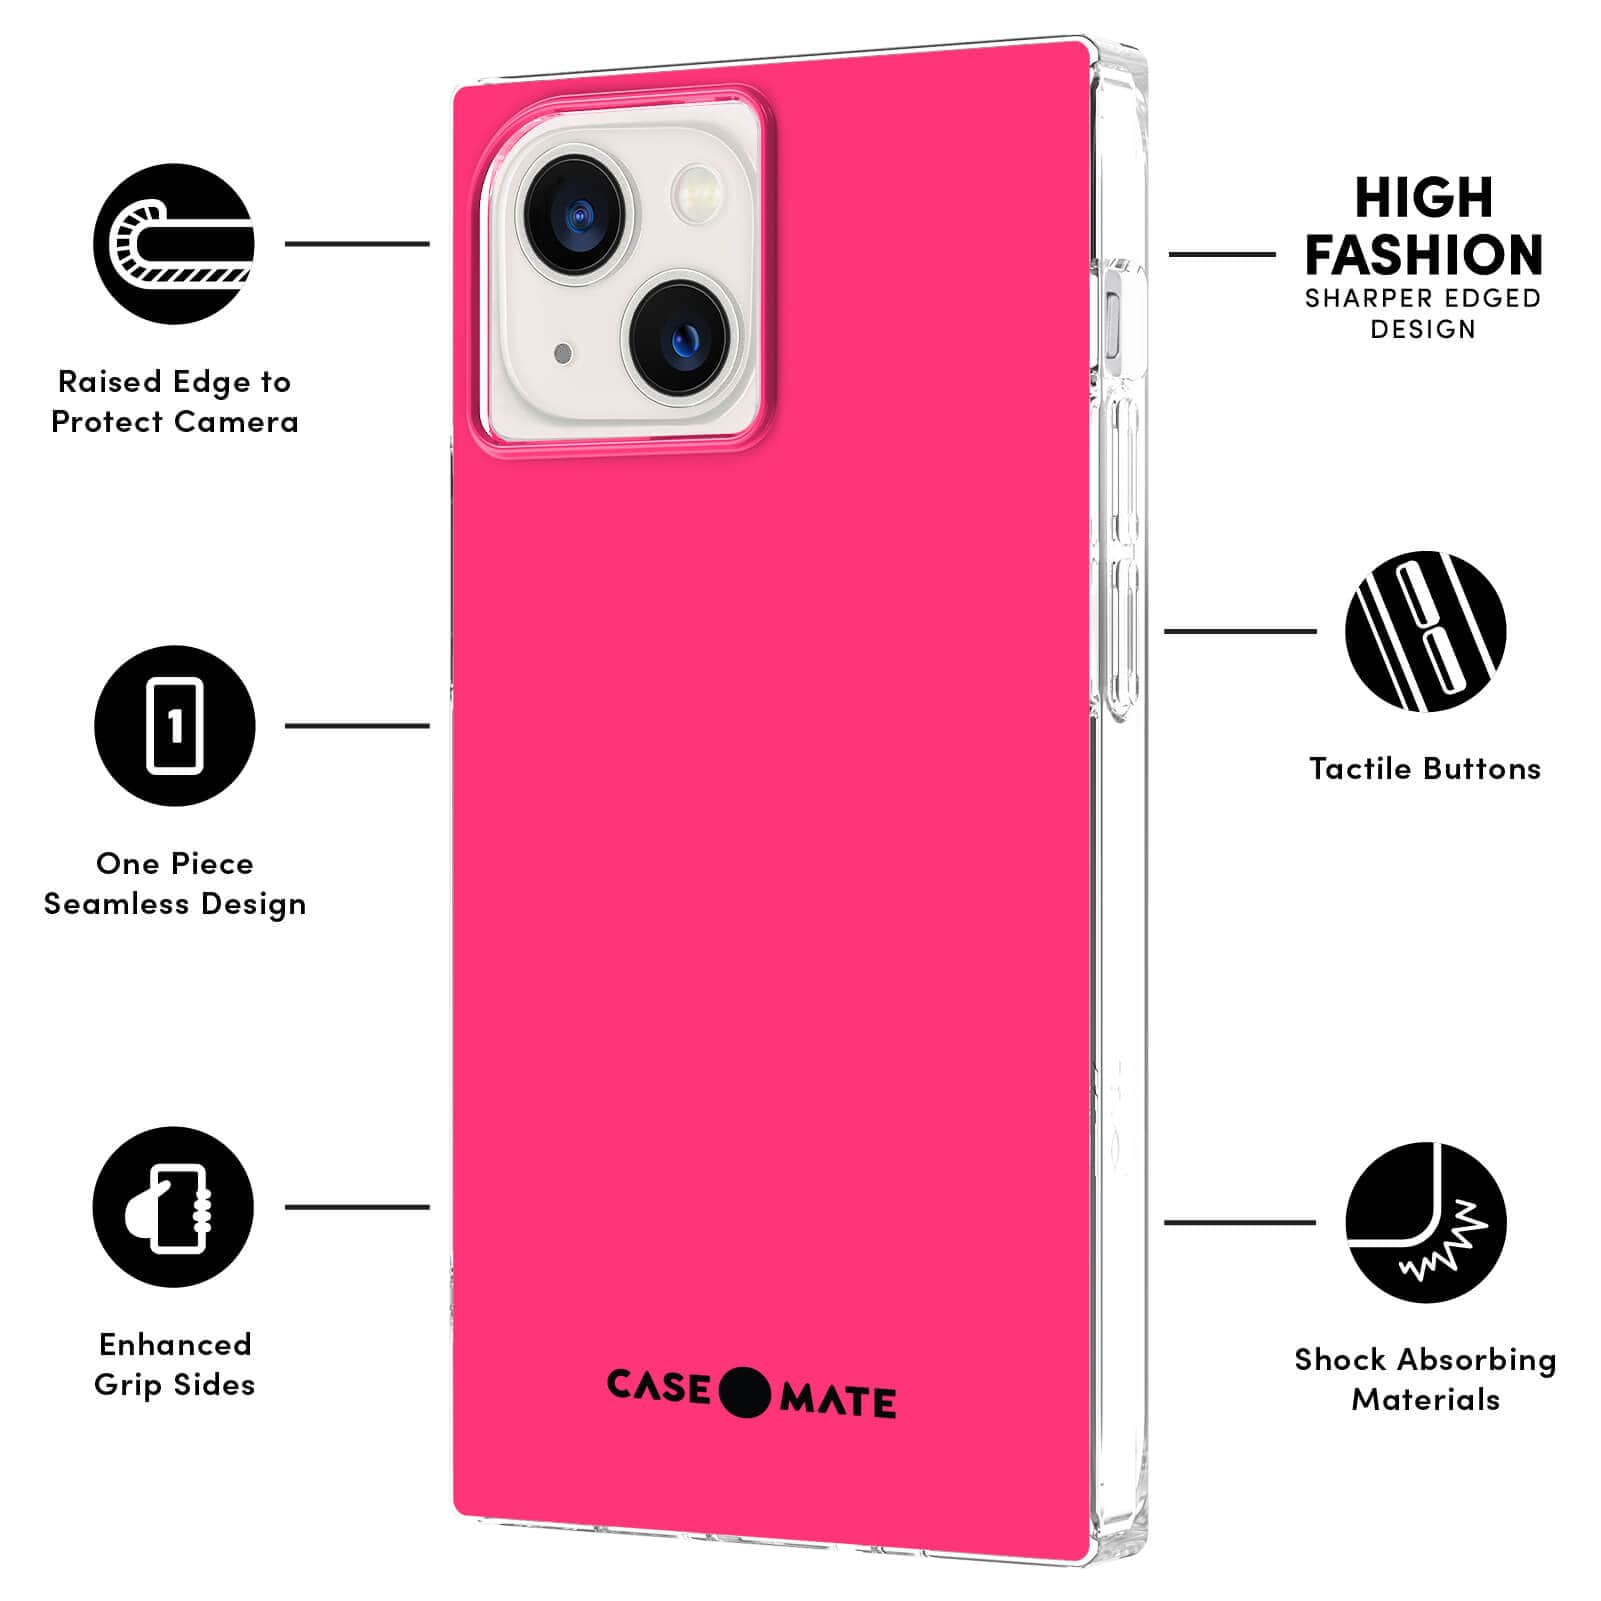 FEATURES: RAISED EDGE TO PROTECT CAMERA, ONE PIECE SEAMLESS DESIGN, ENHANCED GRIP SIDES, HIGH FASHION SHARPER EDGED DESIGN, TACTILE BUTTONS, SHOCK ABSORBING MATERIALS. COLOR::Hot Pink